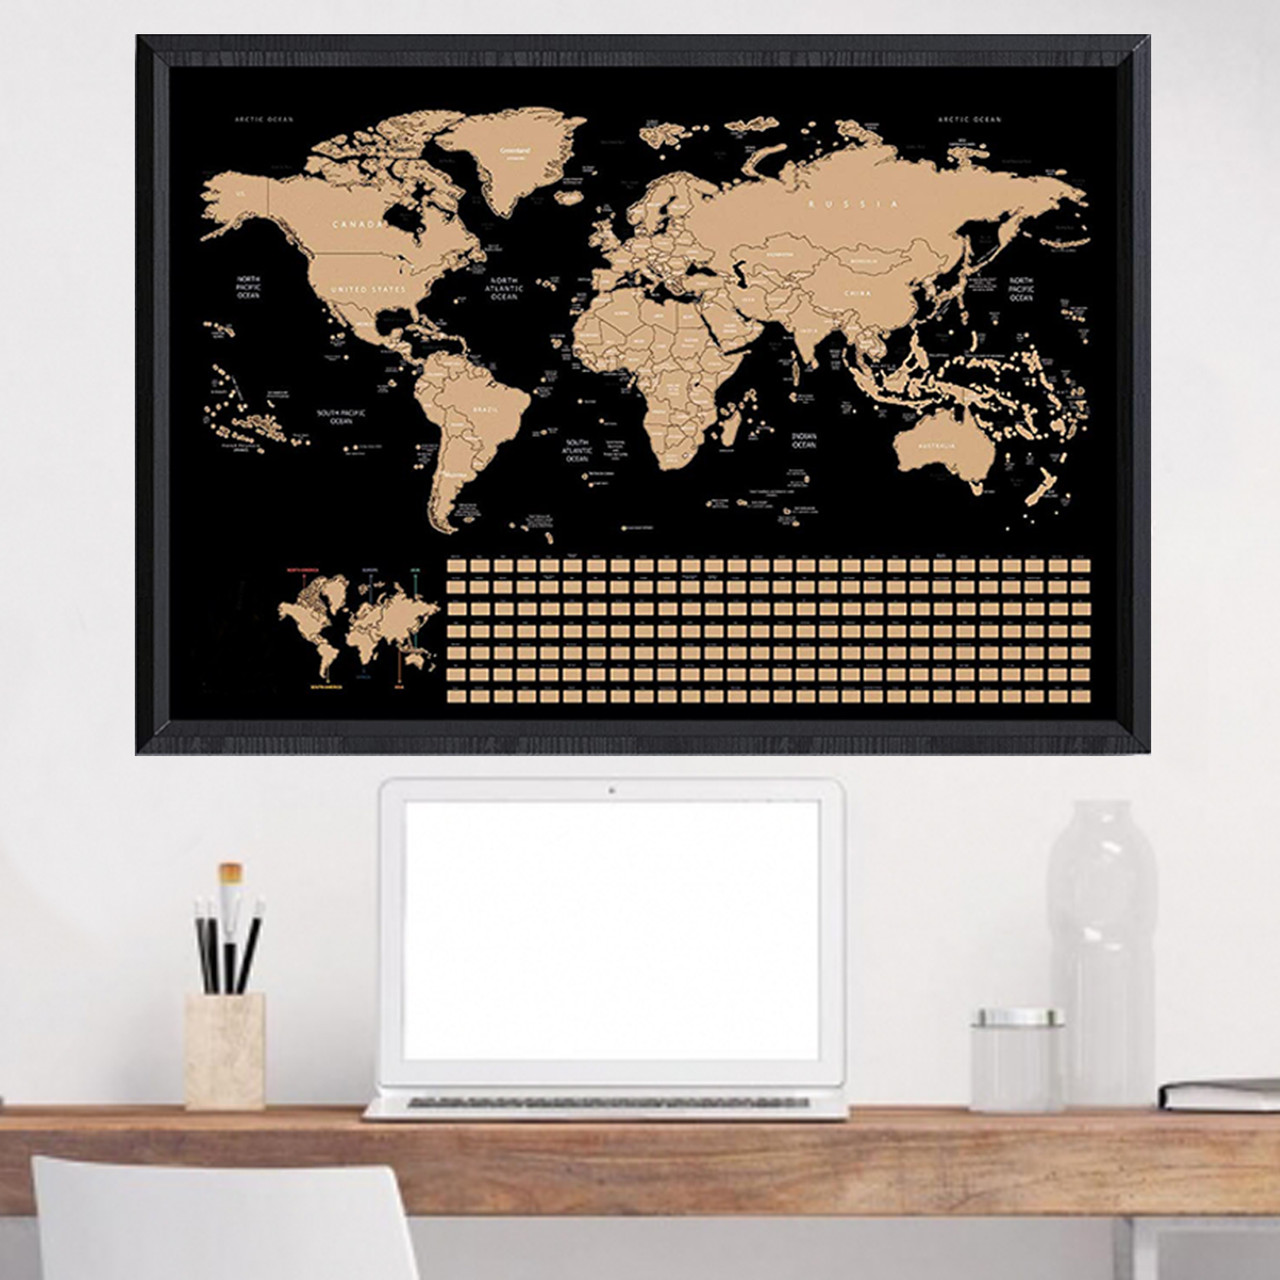 Scratch-off Travel Destination Tracker World Map Poster product image